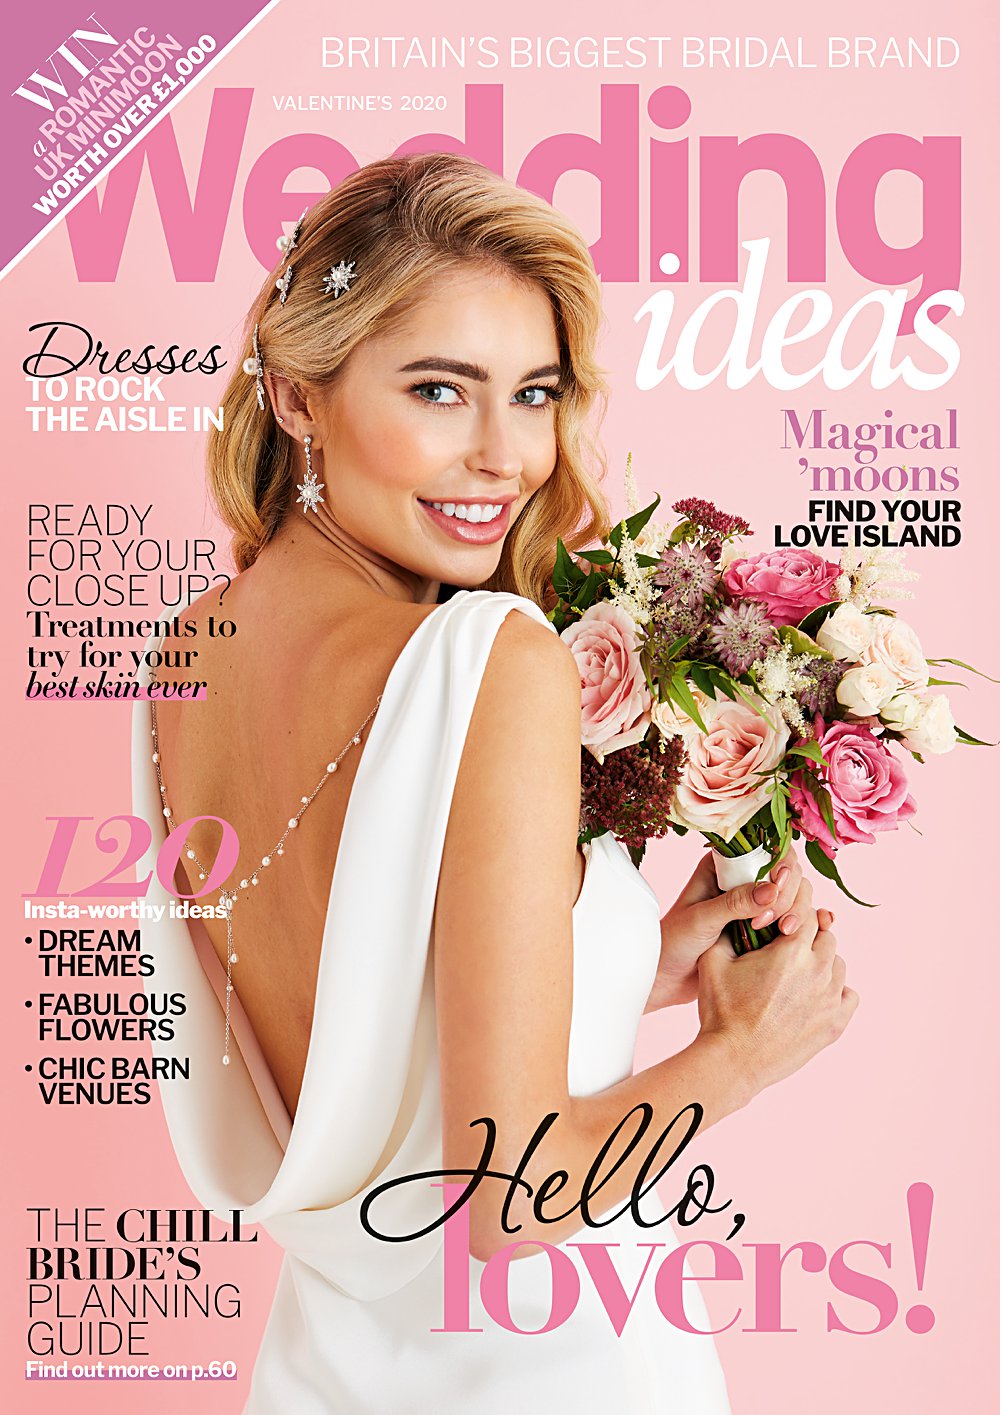 The Valentines cover of Wedding Ideas styled by Pierre Carr